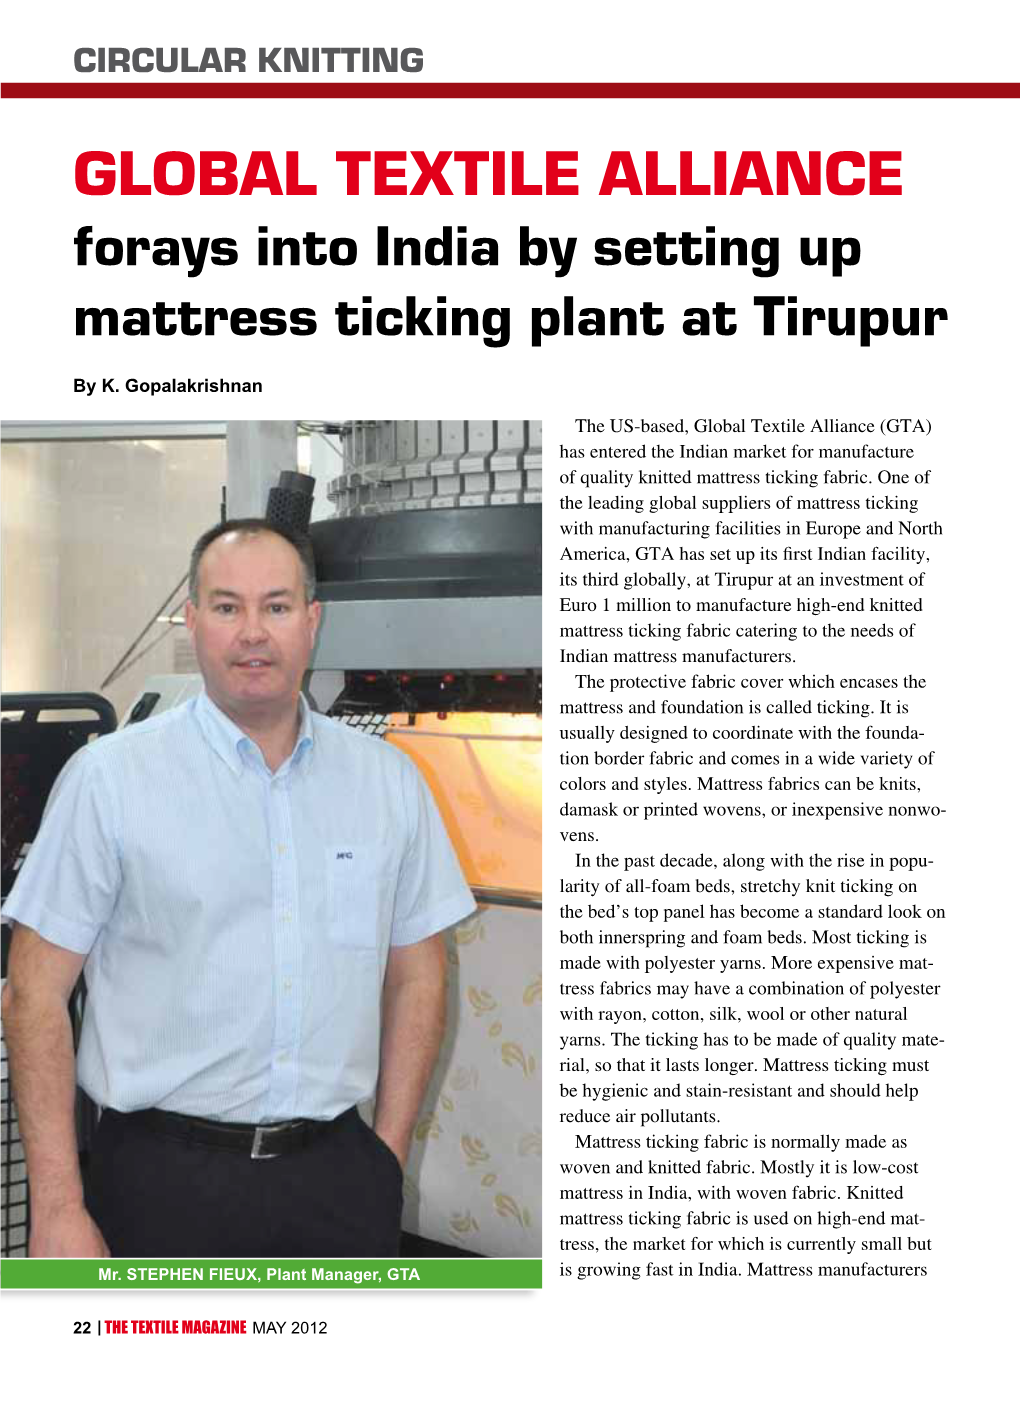 Global Textile Alliance Forays Into India by Setting up Mattress Ticking Plant at Tirupur